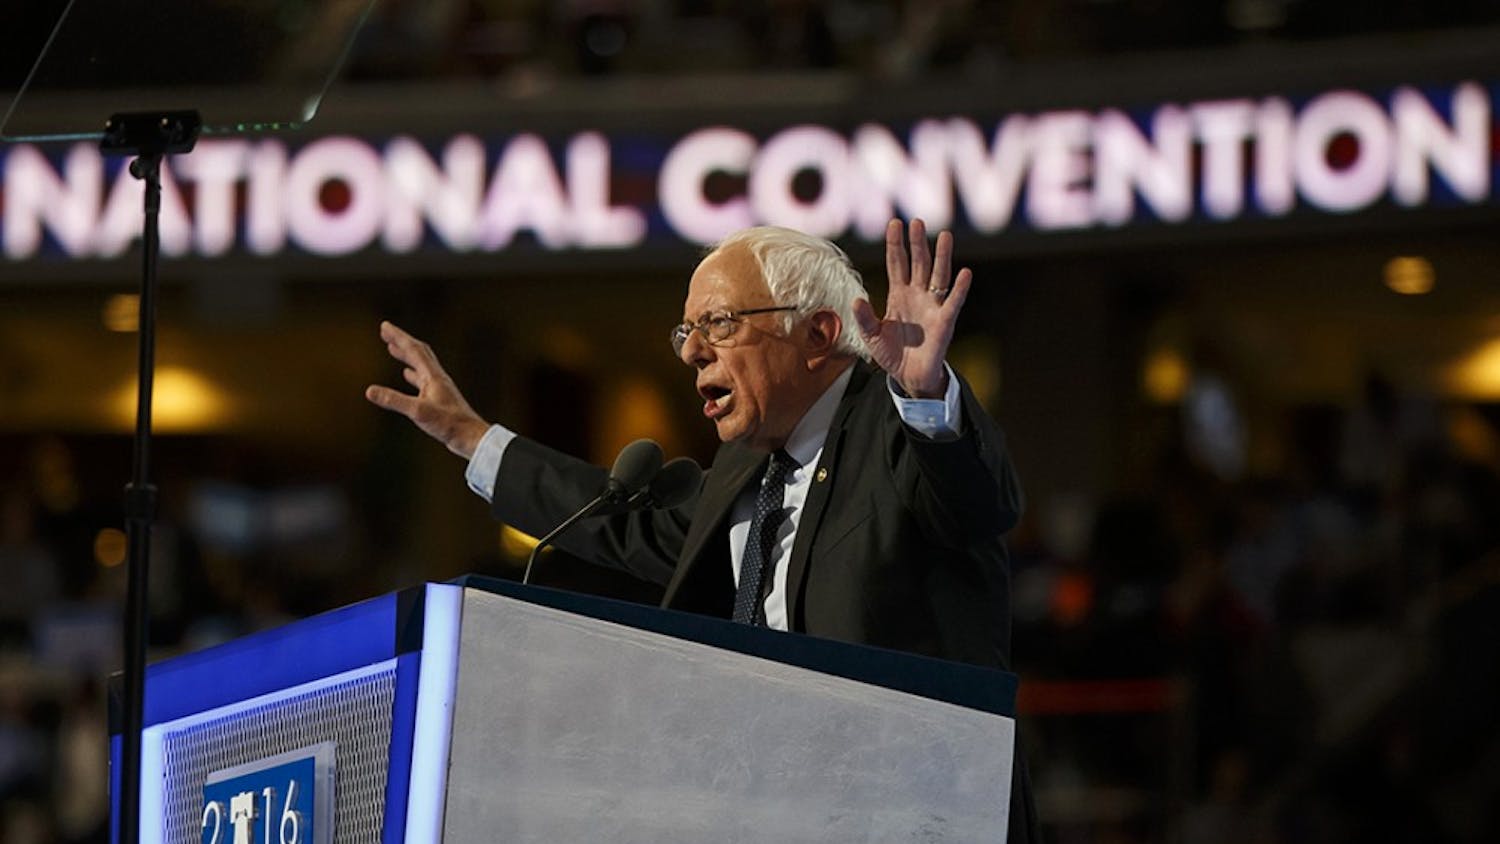 Bernie Sanders speaks passionately on the first night of the Democratic National Convention on Monday, July 25, 2016 in Philadelphia, Pa. (Marcus Yam/Los Angeles Times/TNS)